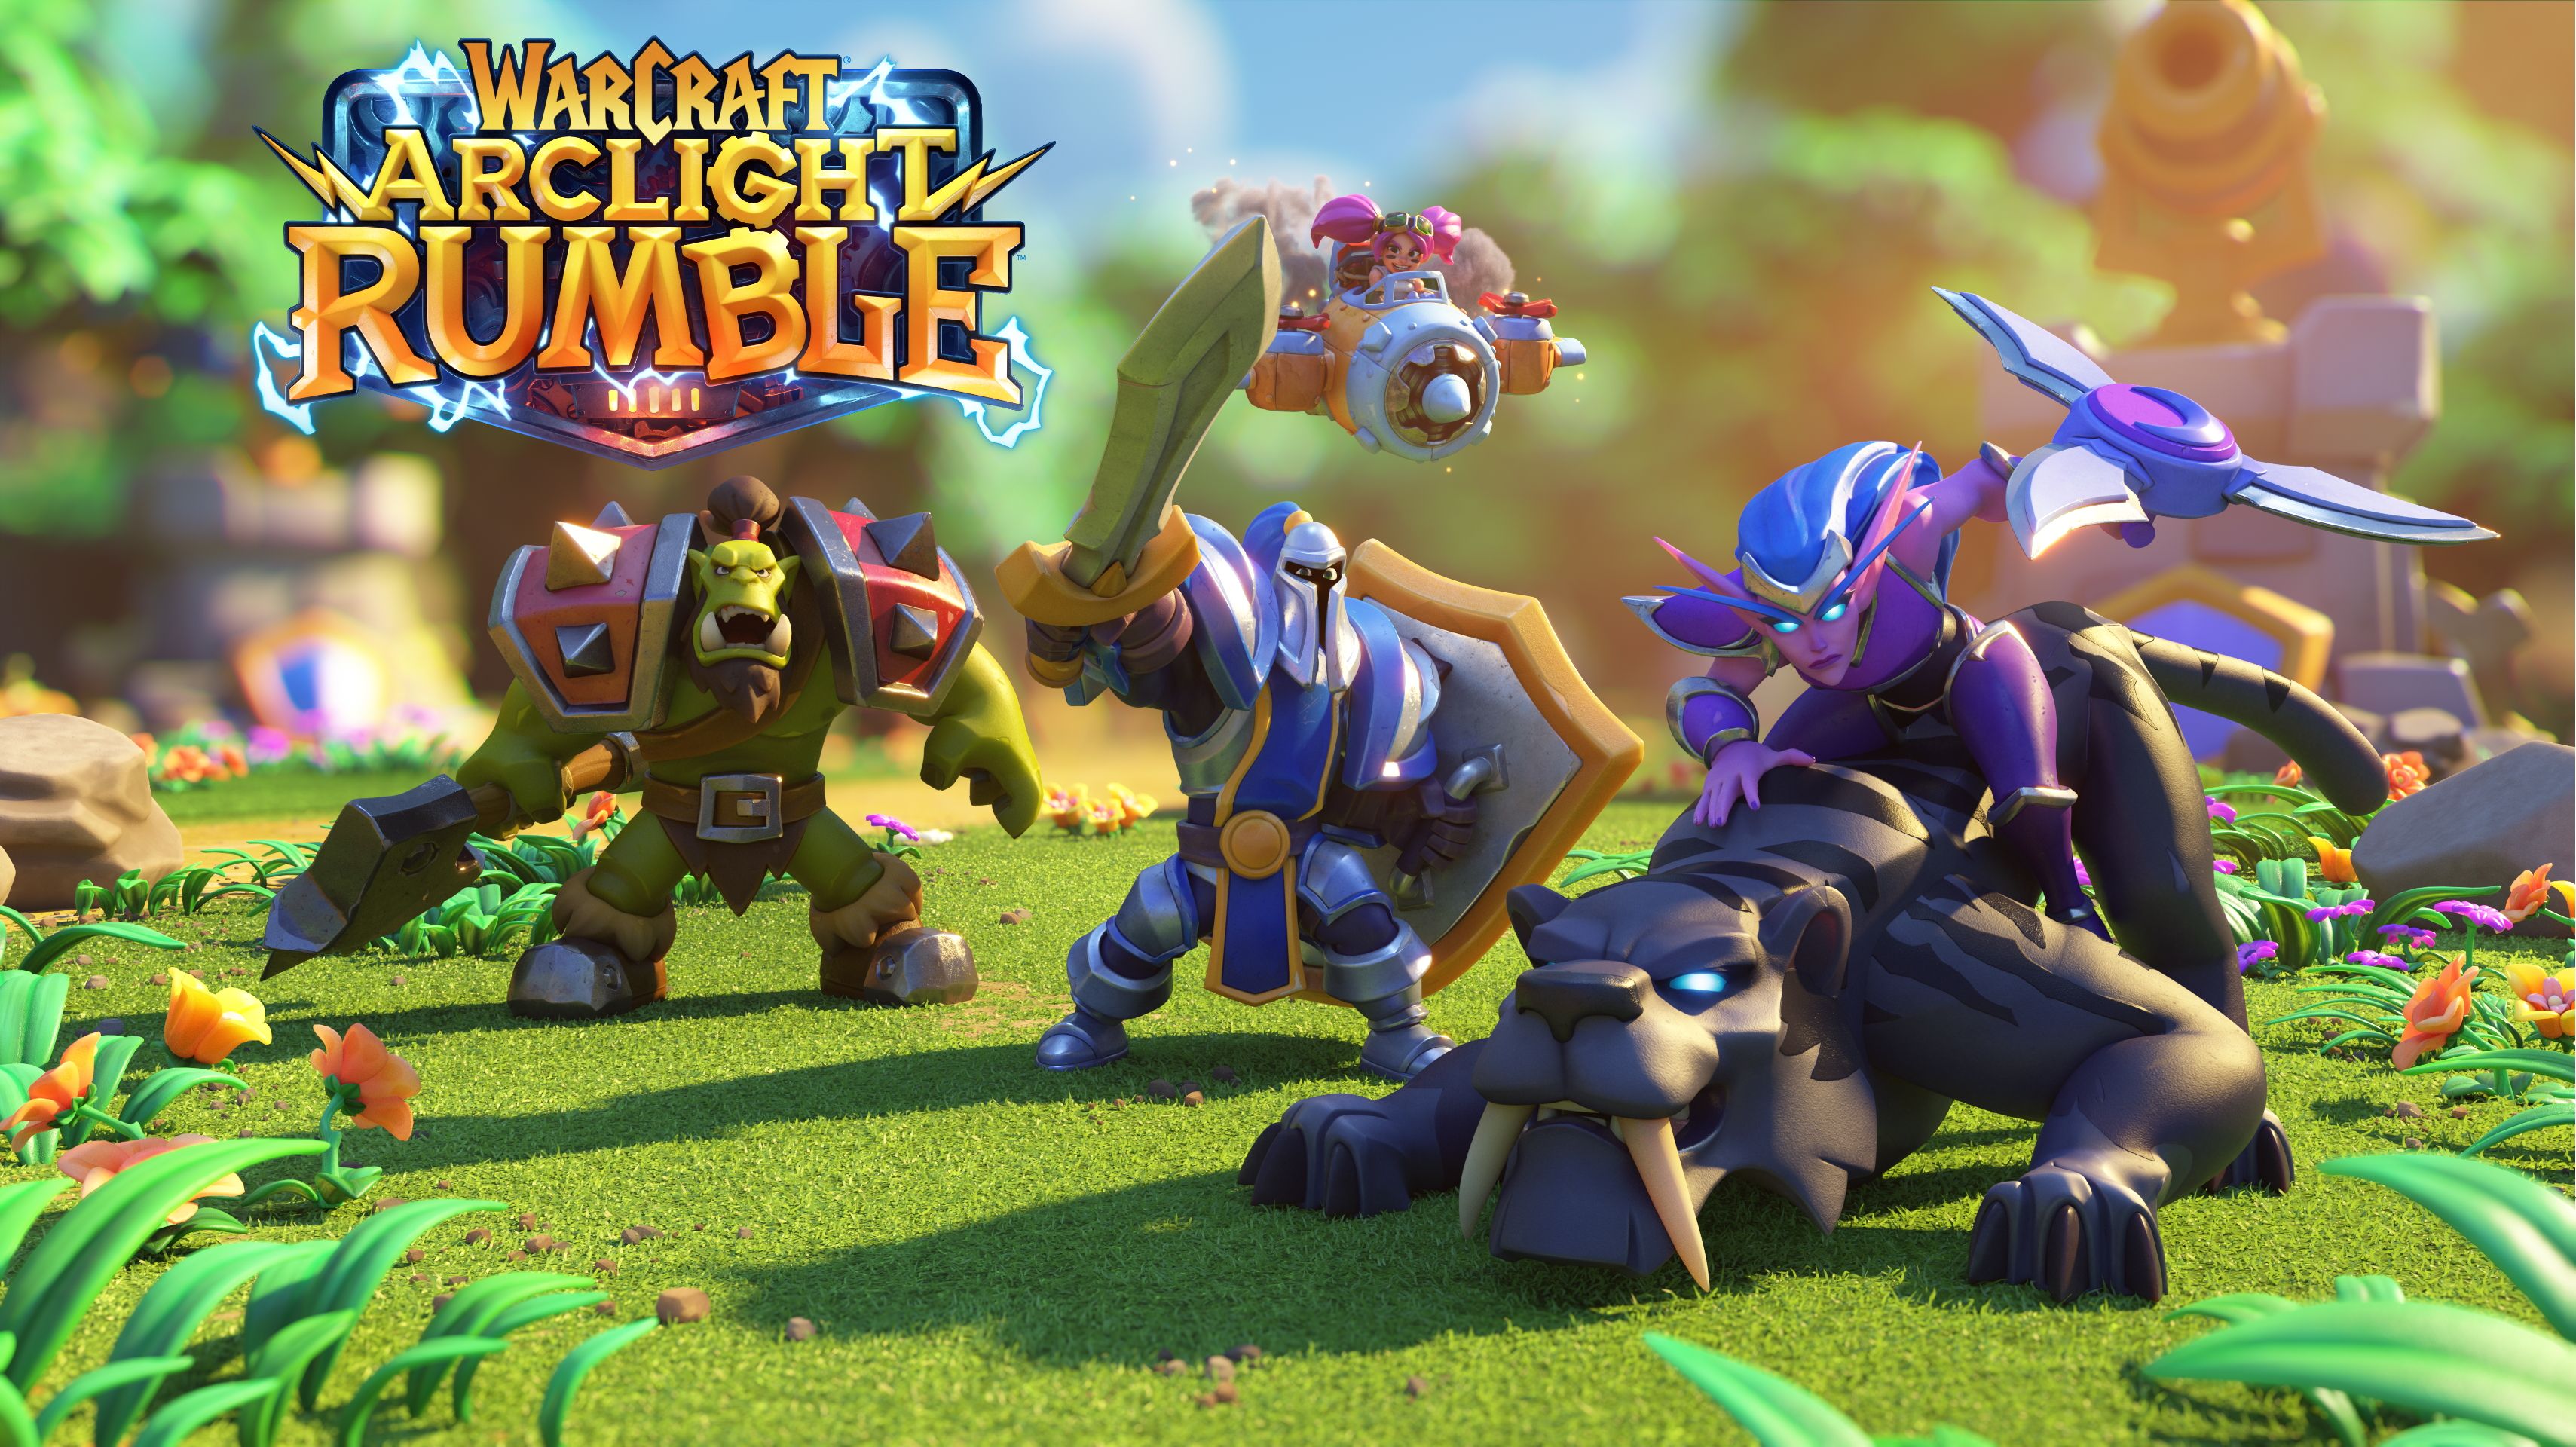 Warcraft Arclight Rumble first look: Blizzard has a brand new RTS for mobile